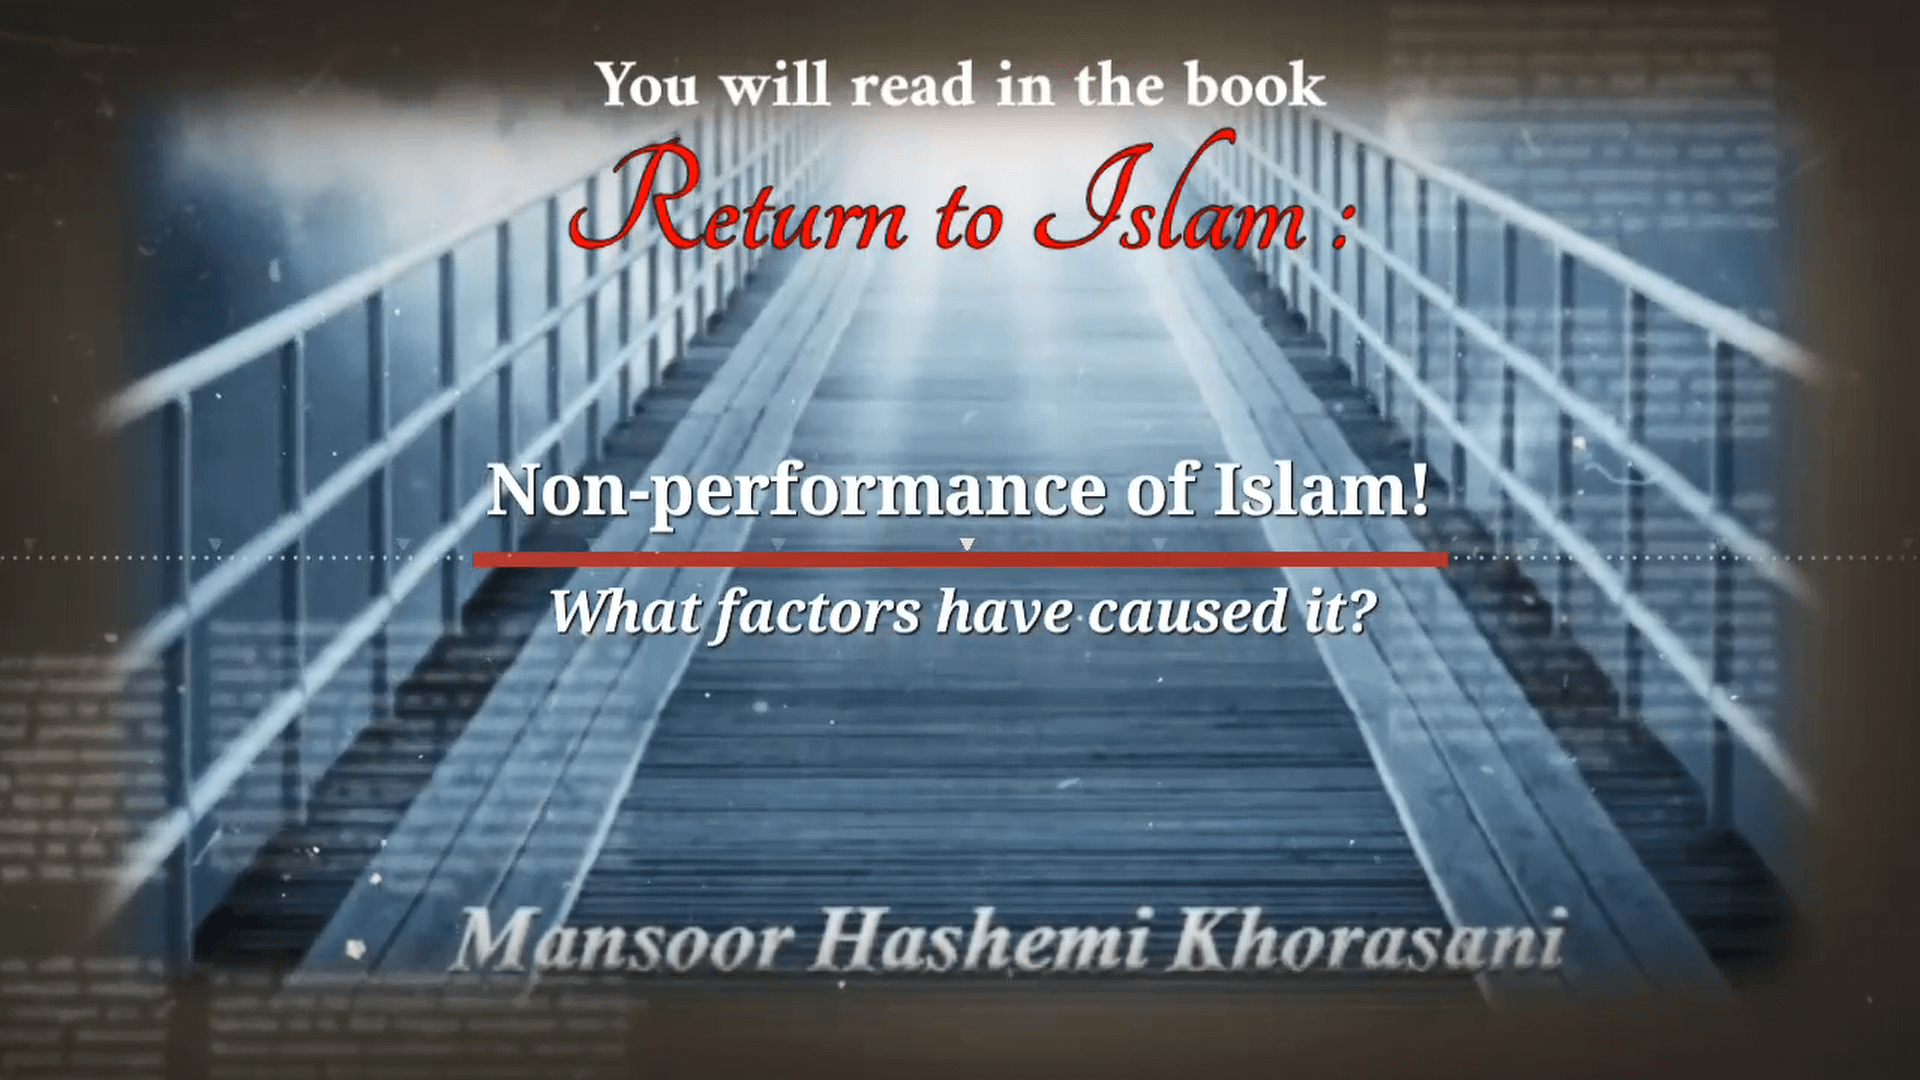 Causes for non-performance of Islam